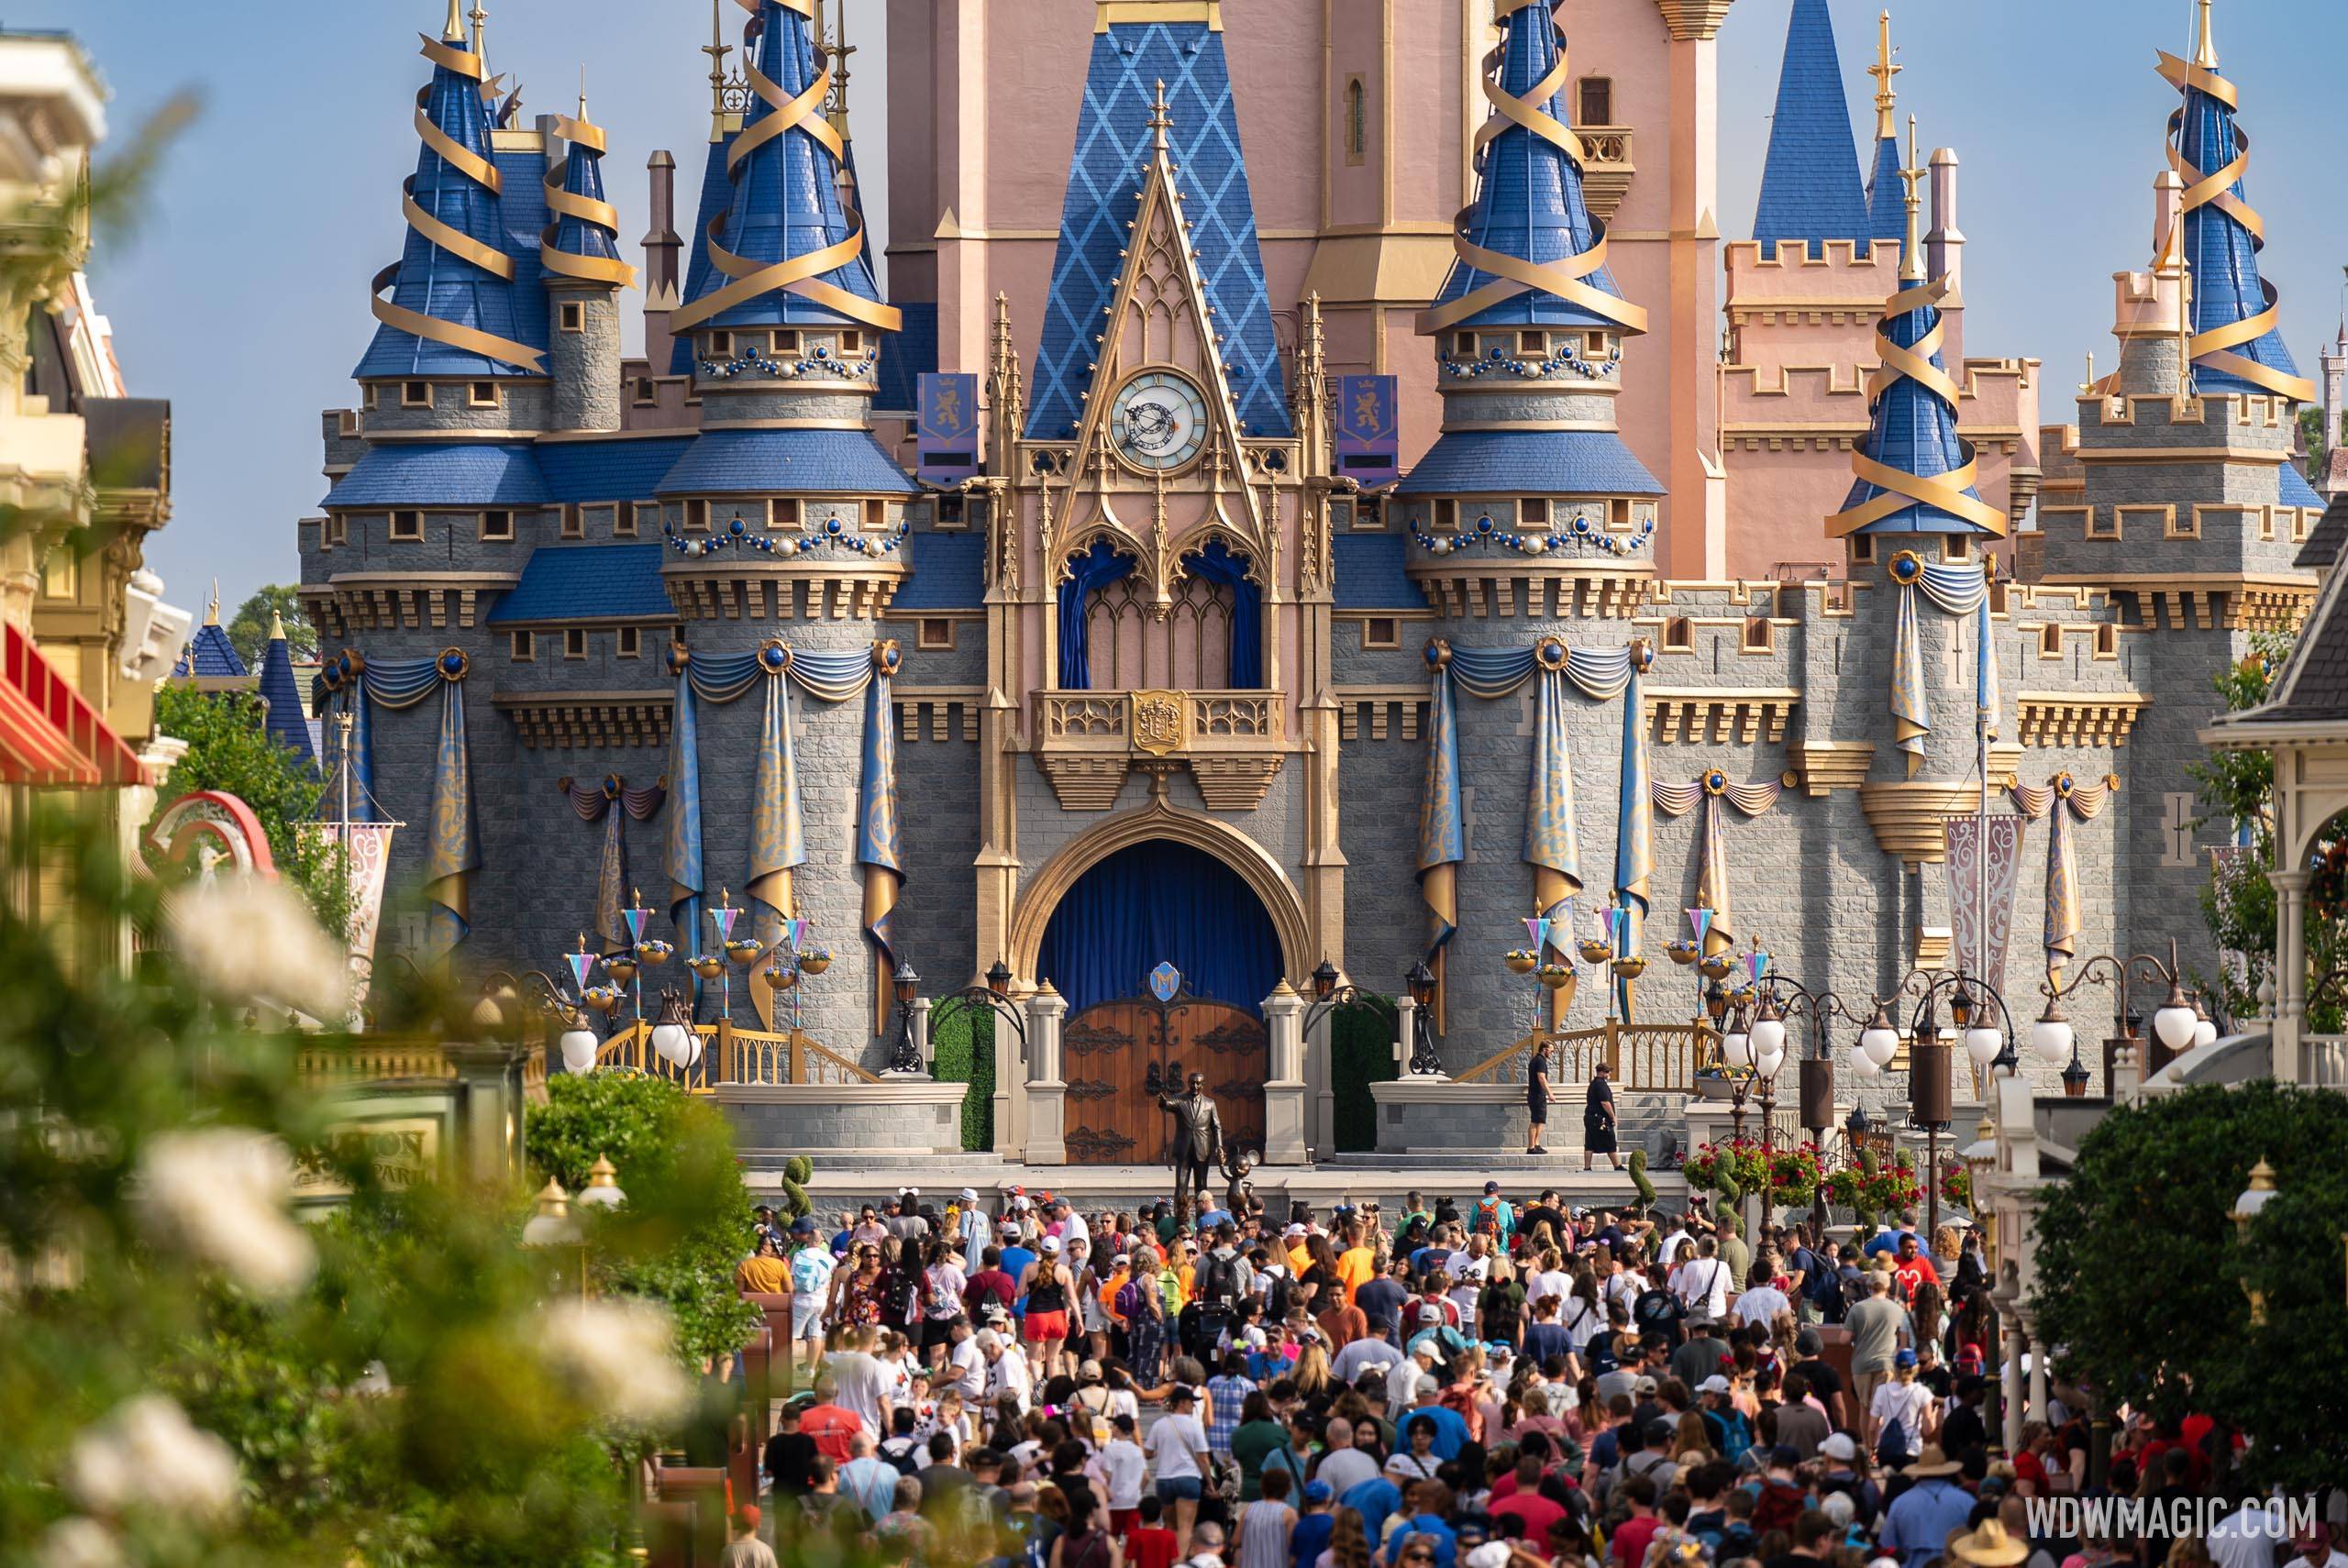 New theme park reservation policy goes into effect today at Walt Disney World